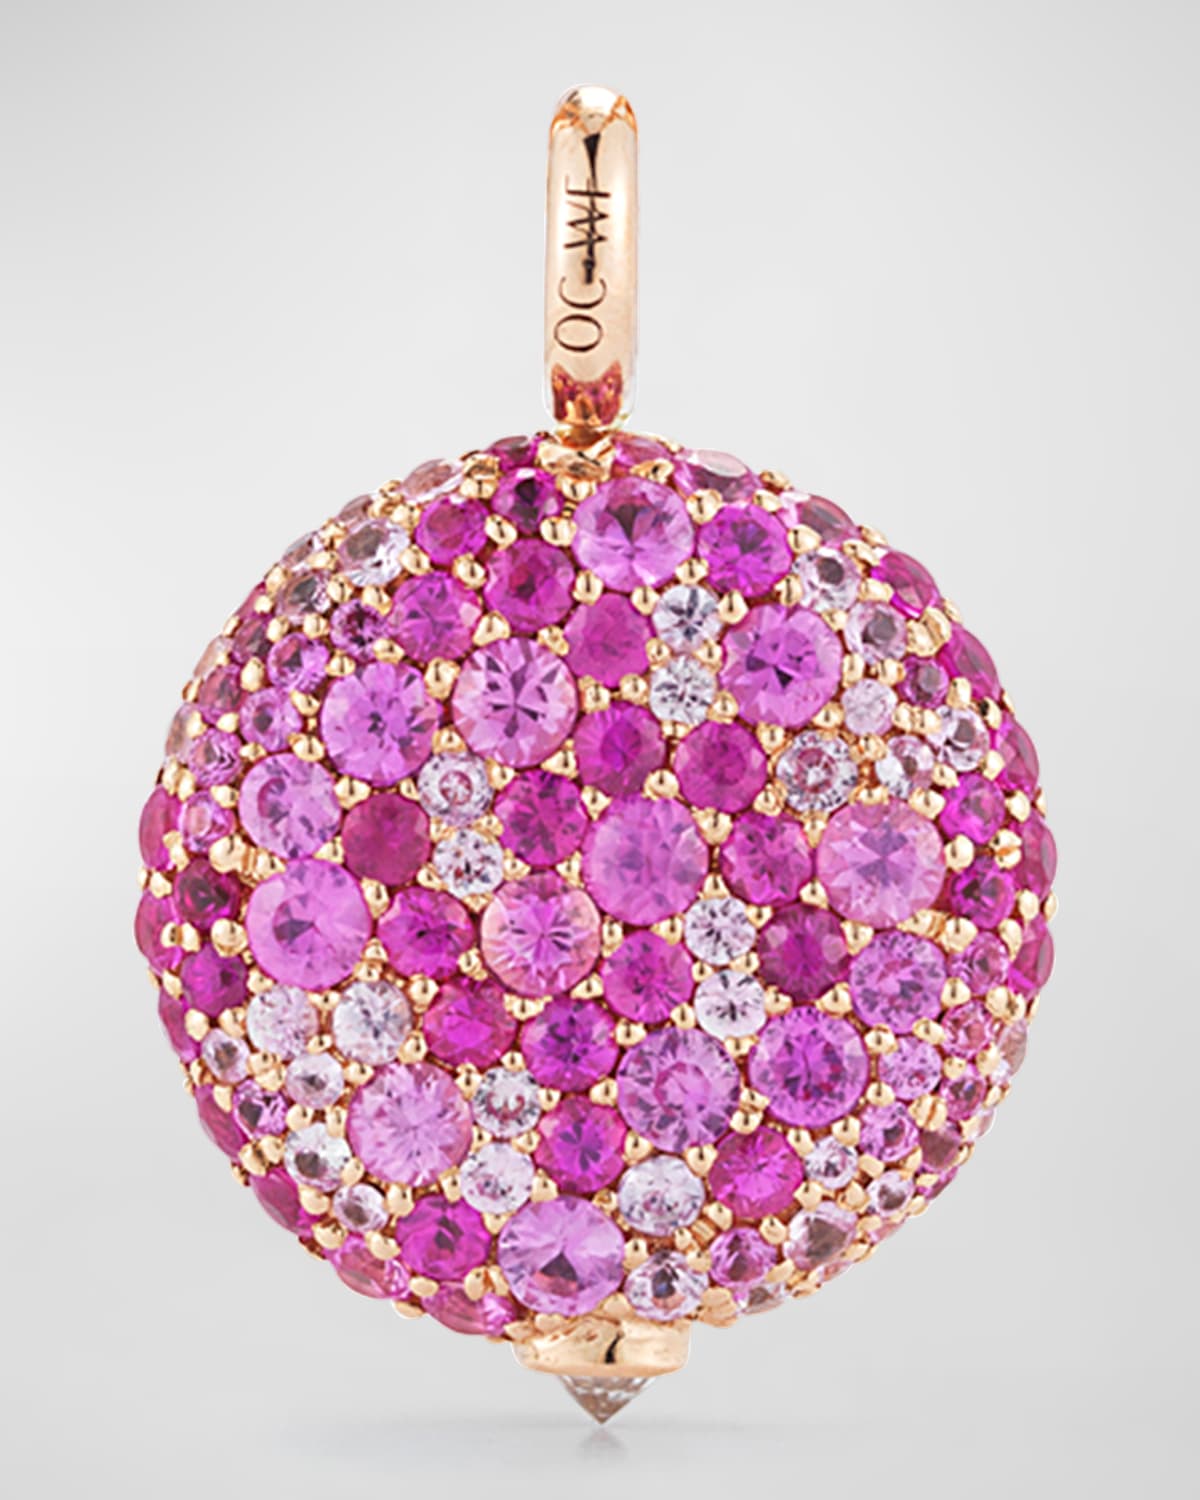 14mm Medium Pebble Pendant in 18K Rose Gold and Pink Sapphires